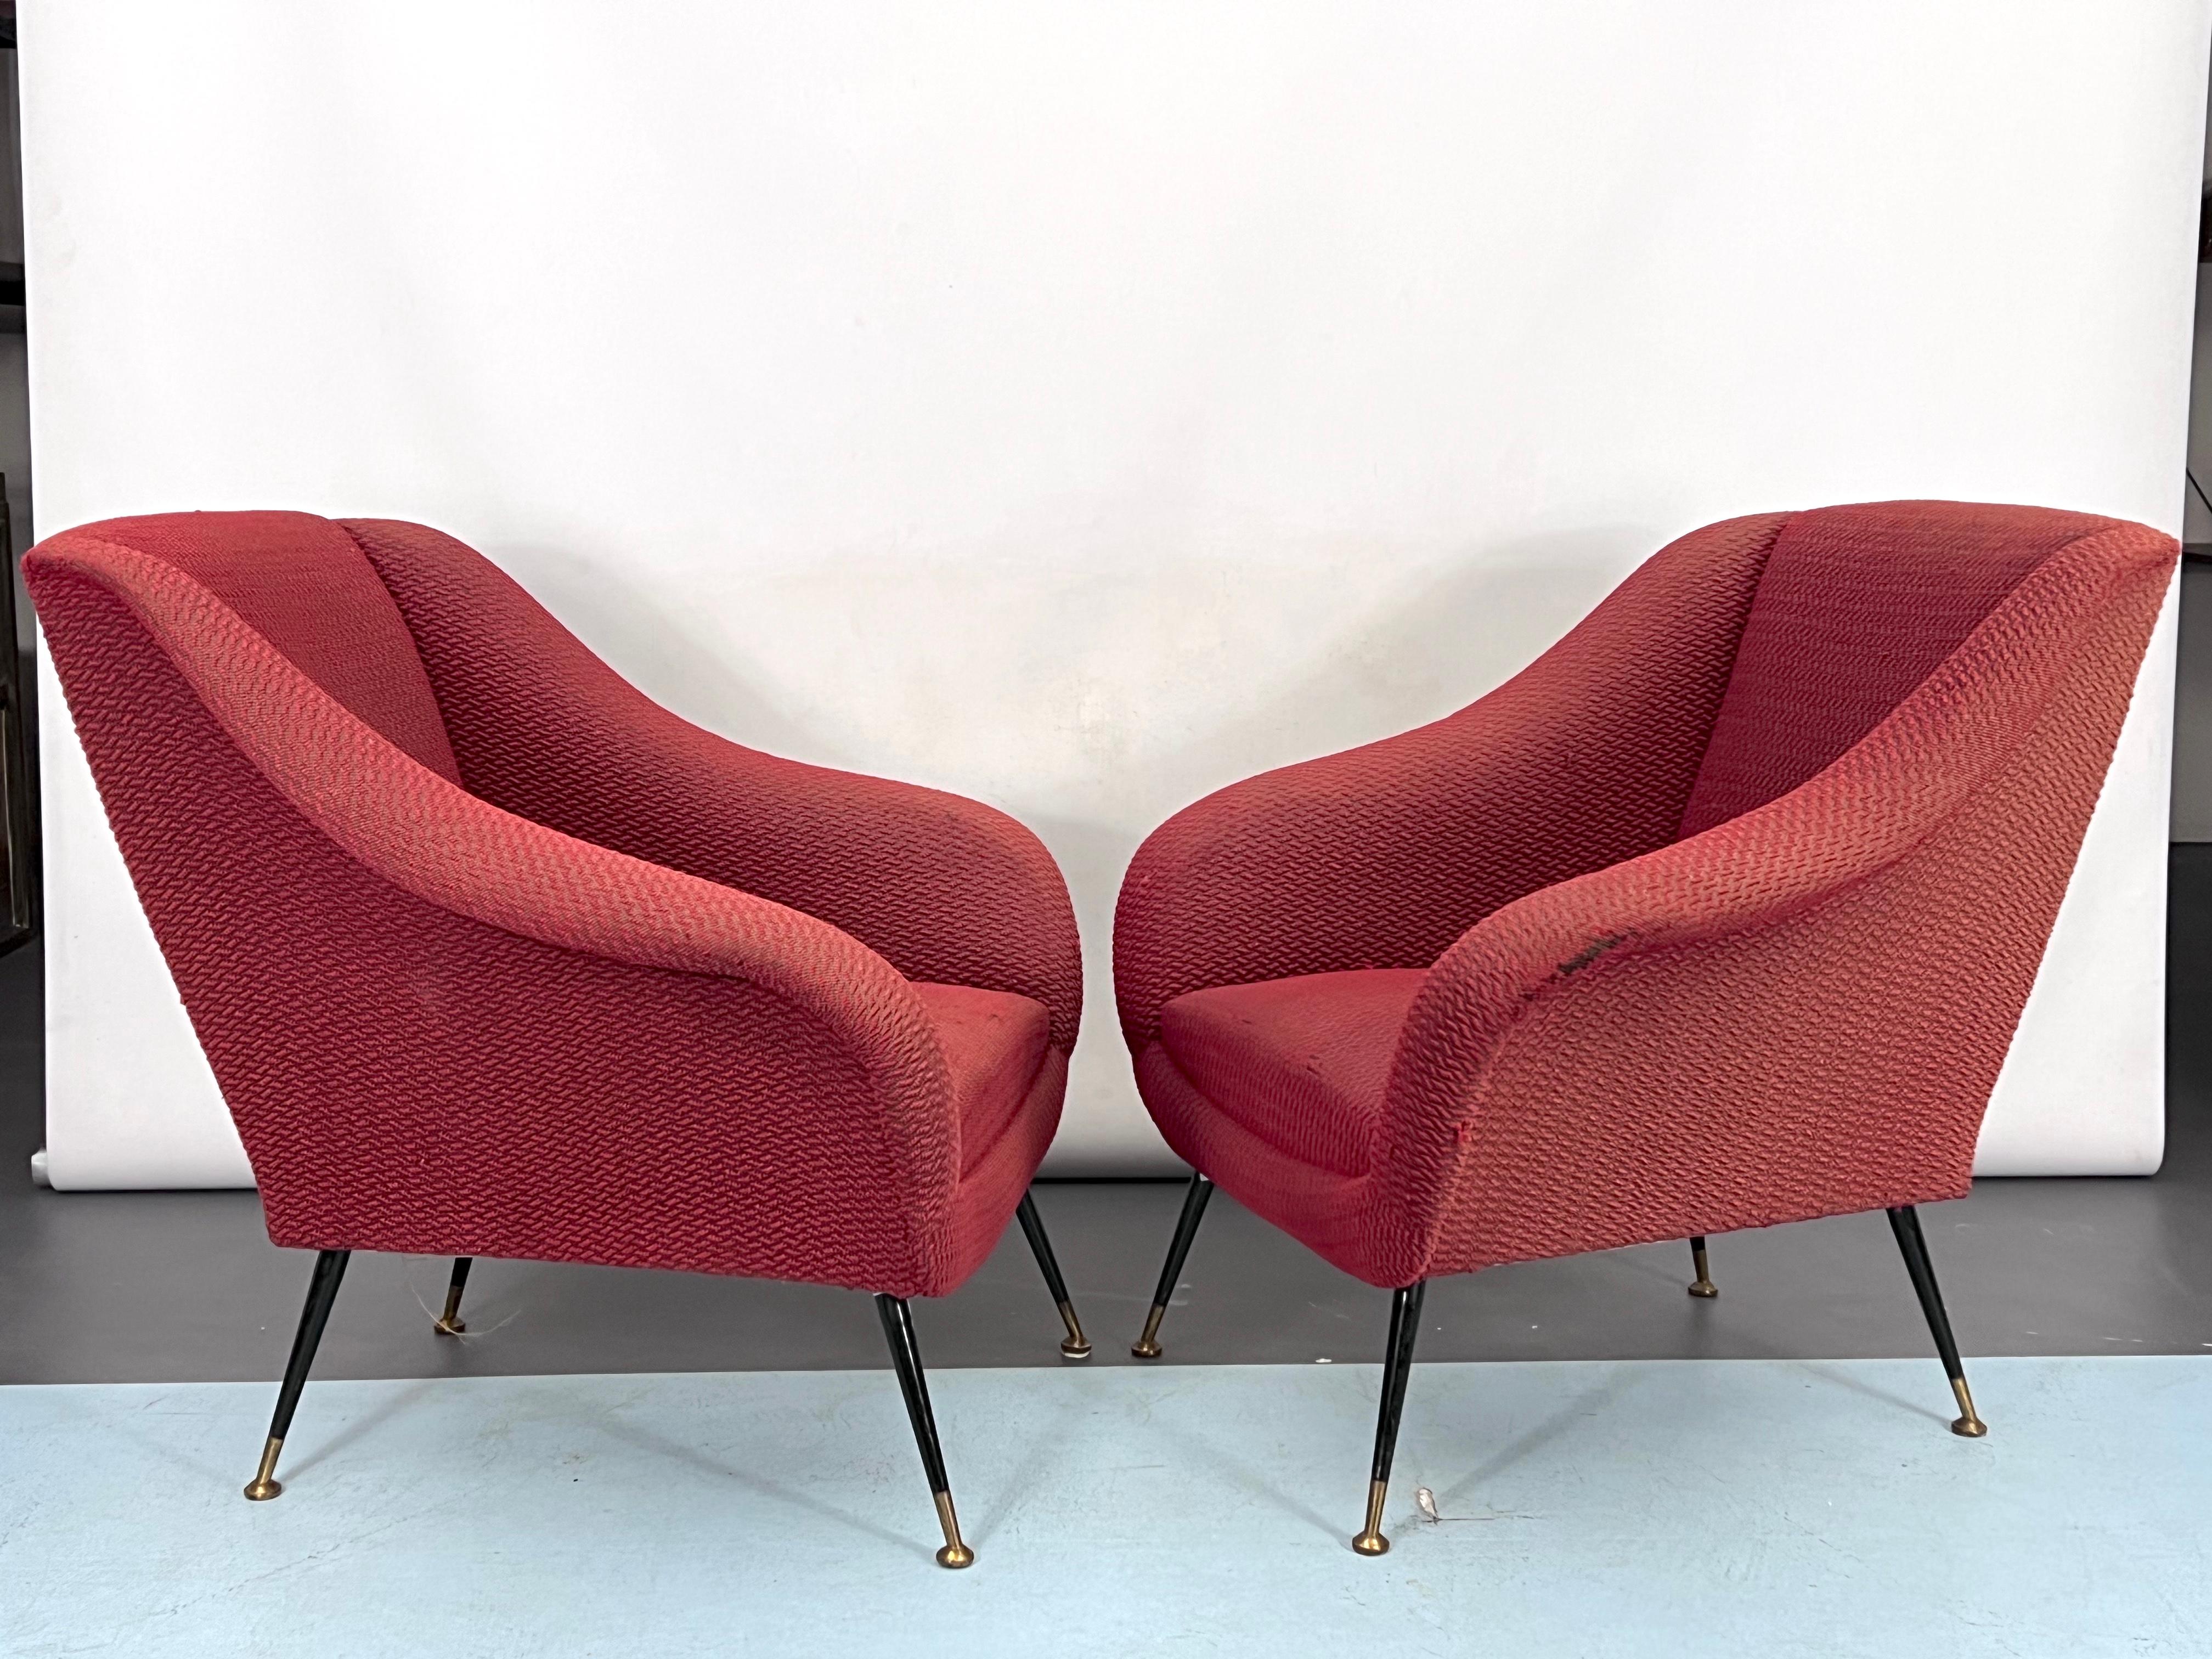 Set of two armchairs with brass feet and original fabric with evident trace of age and use and some rips. Designed by Gigi Radice and manufactured in Italy during the 50s.